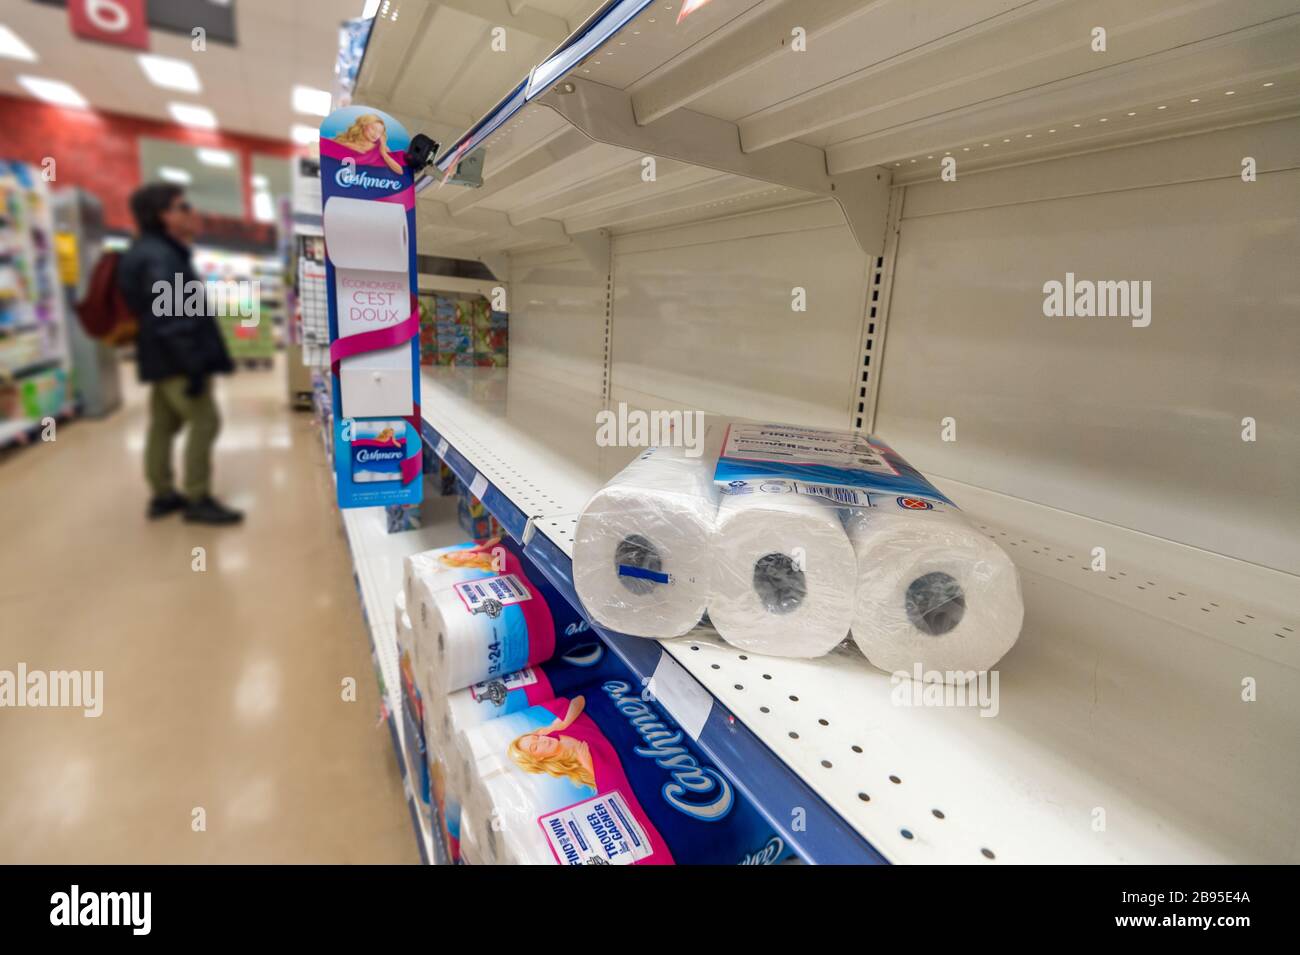 Montreal, CA - 20 March 2020: Empty shelves of toilet paper in a supermarket. Shortage of supplies due to panic of Coronavirus. Stock Photo